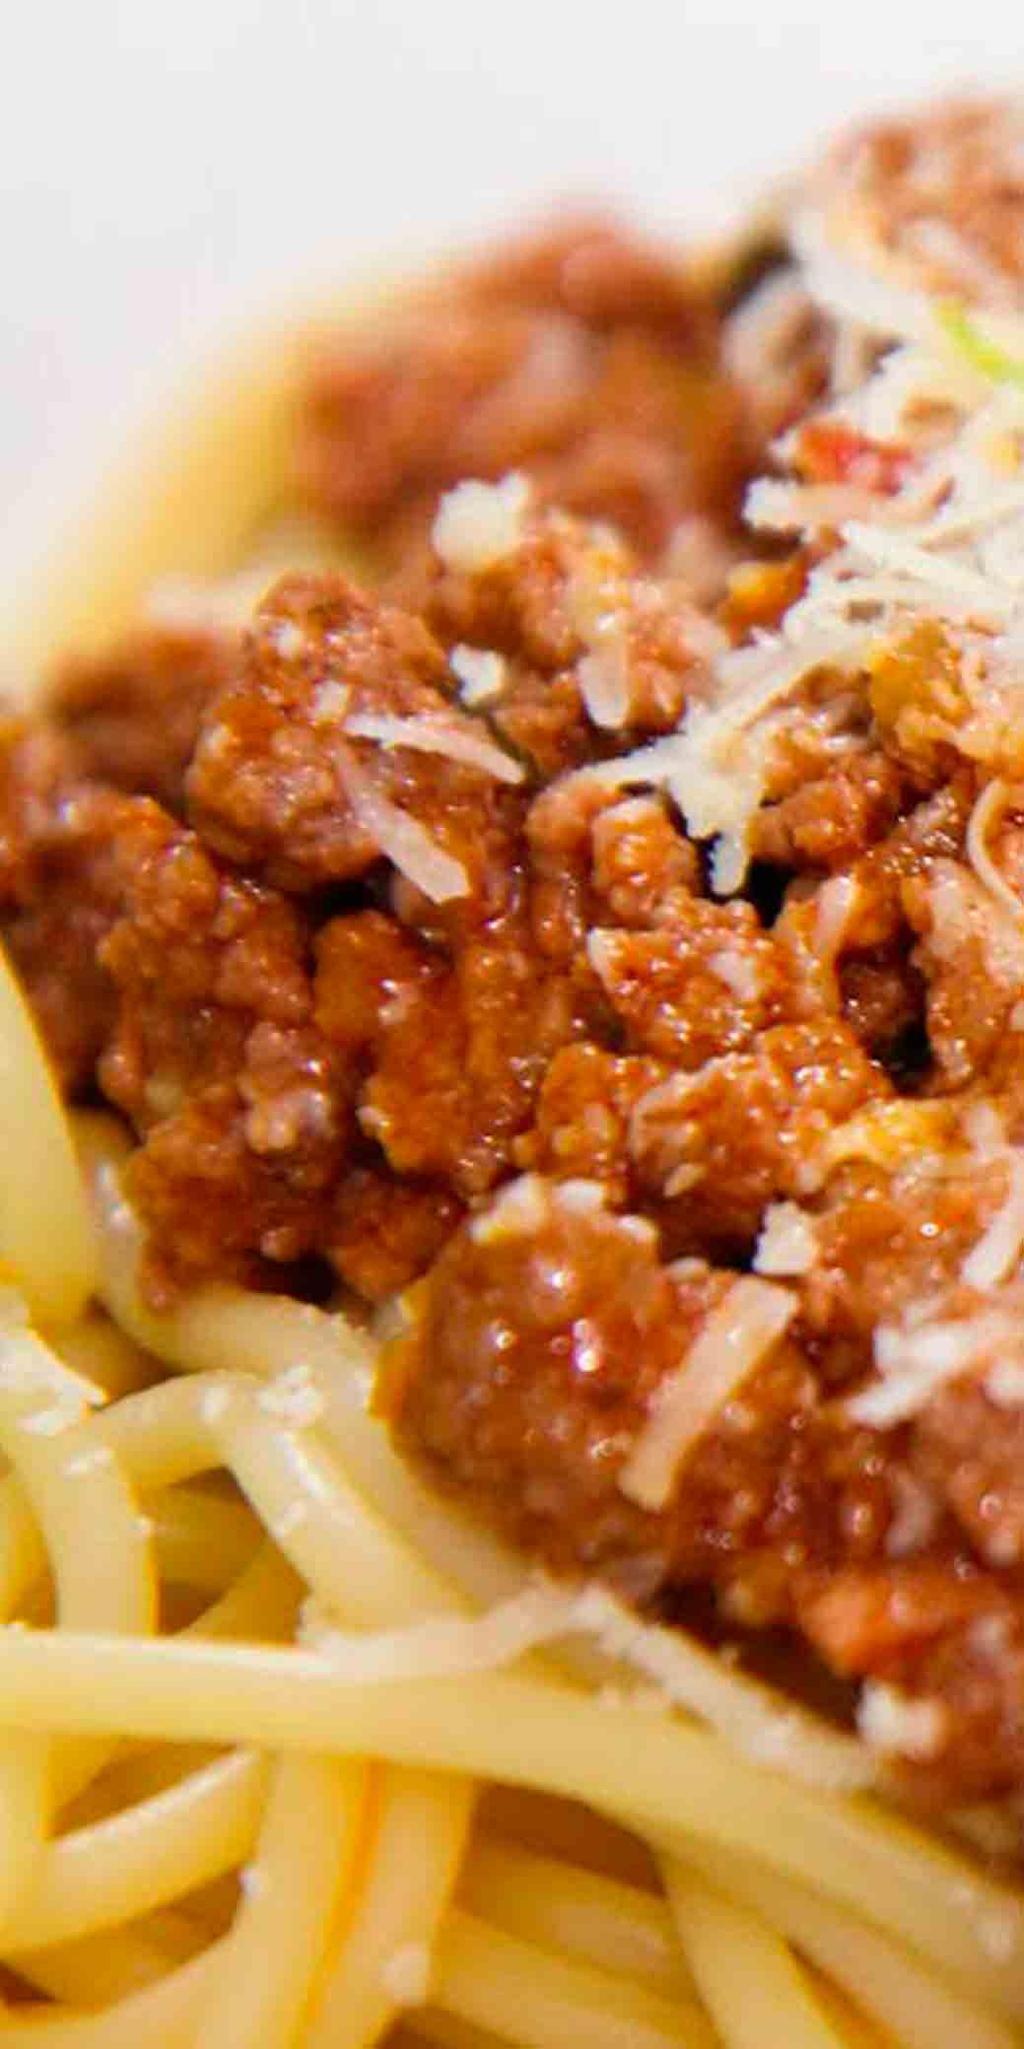 PASTA BOLOGNAISE 1 teaspoon olive oil 1 cup diced vegetables (onion, mushroom, carrot & celery) 100g lean beef mince ¾ cup dried pasta 200g tin tomatoes ½ cup salt reduced beef stock 1 teaspoon of